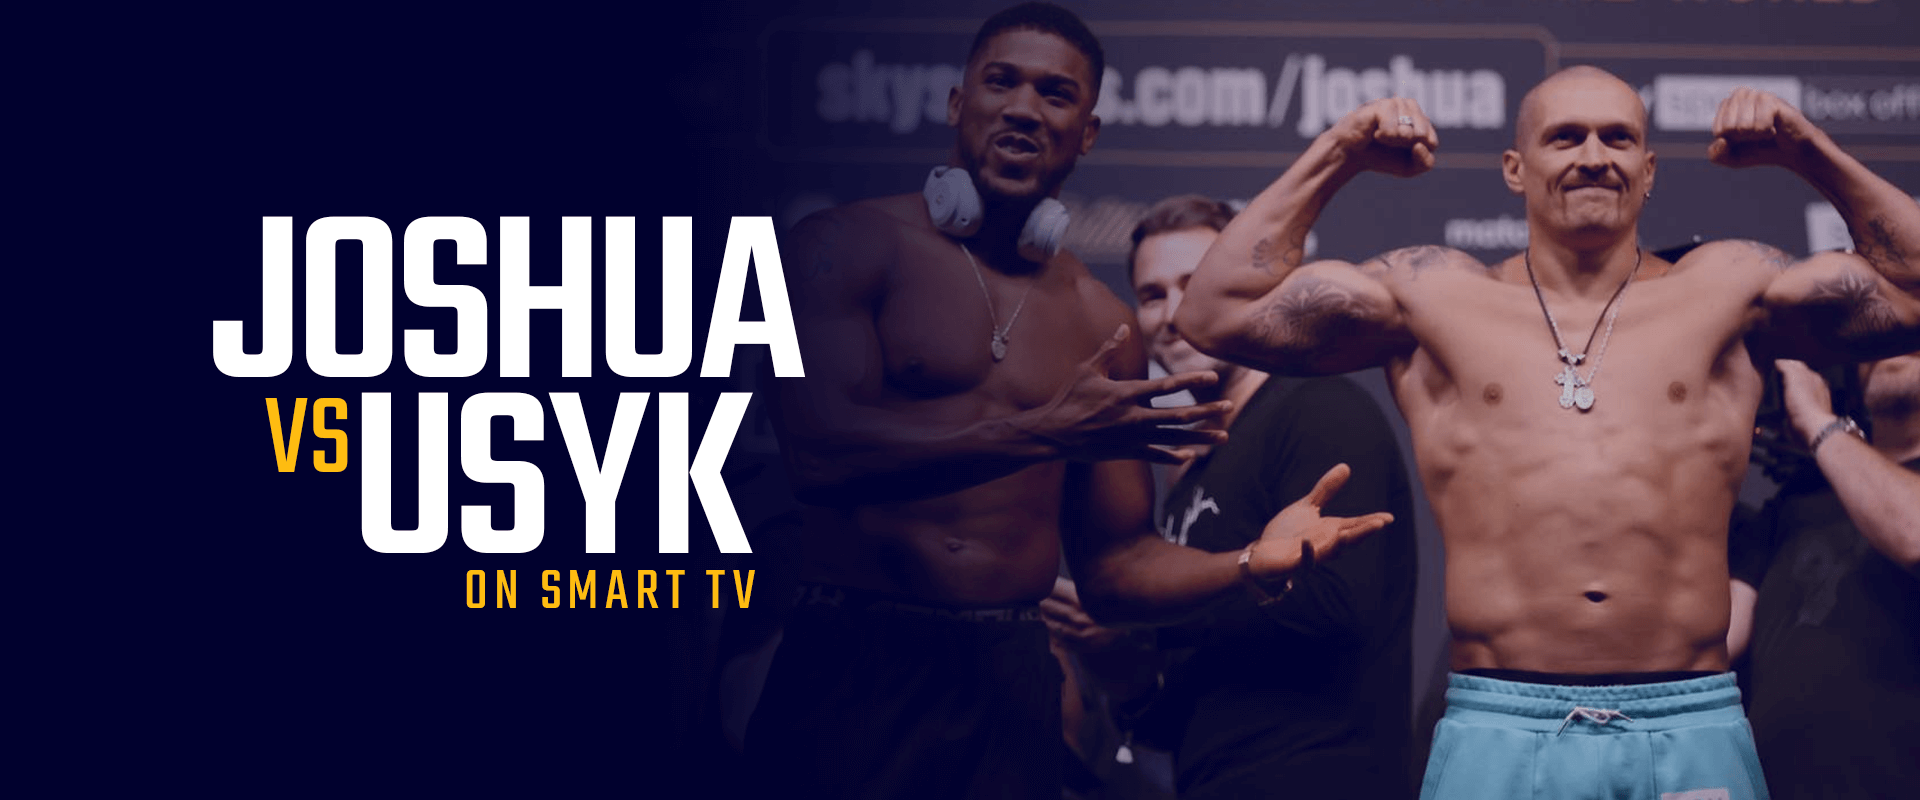 how to watch joshua vs usyk 2 for free